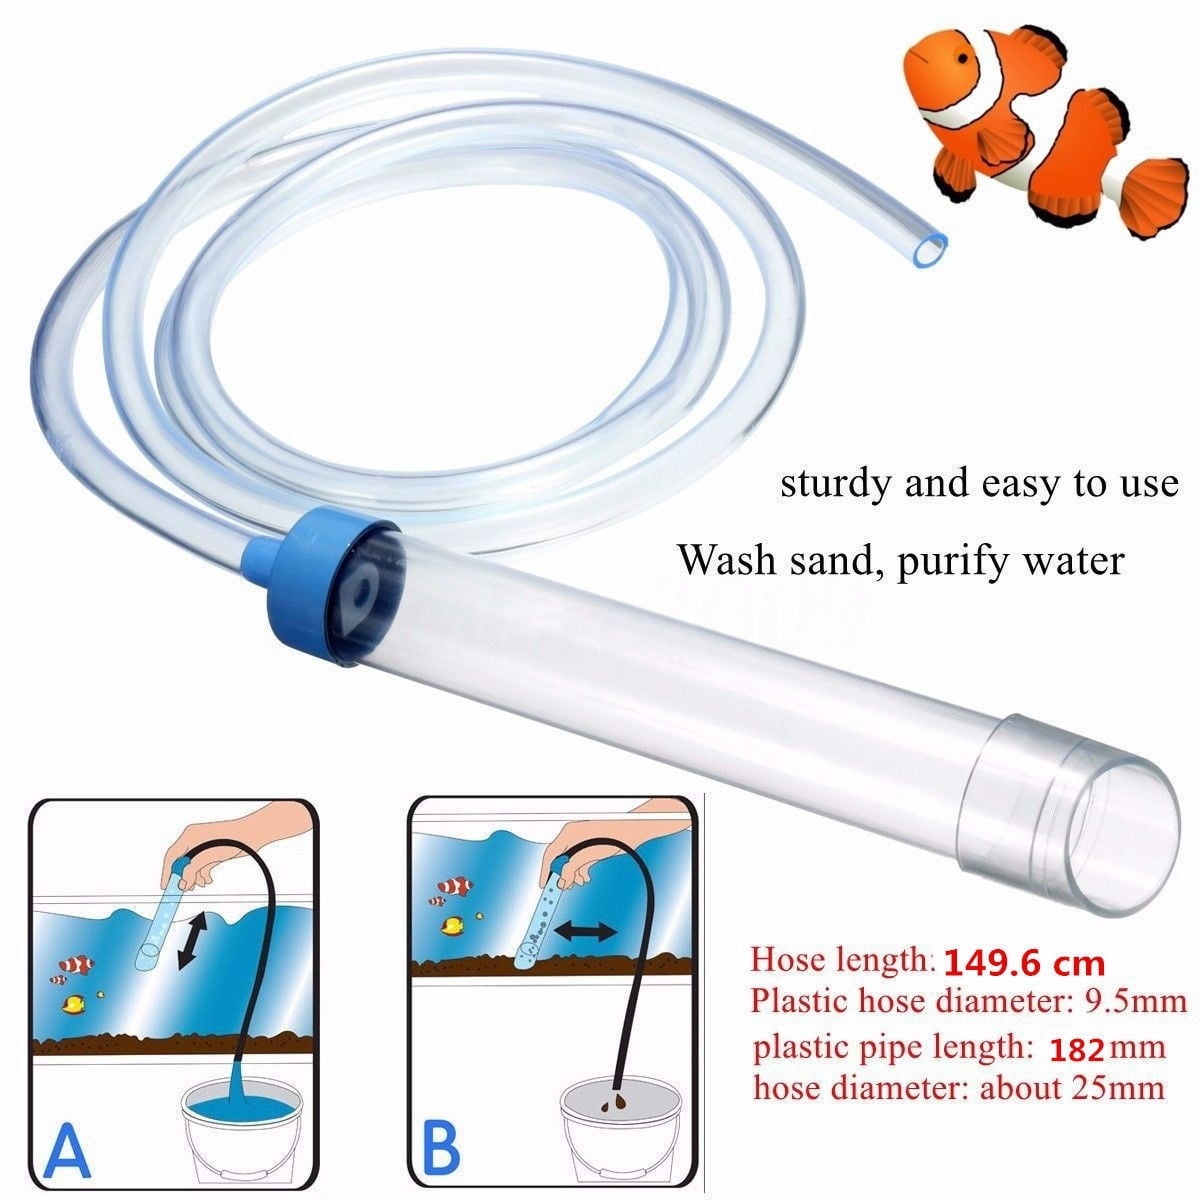 Aquarium Gravel Cleaner Fully Adjustable Hose Length for Different Aquarium Sizes A Hand Syphon Pump to Drain Away Water in Minutes 